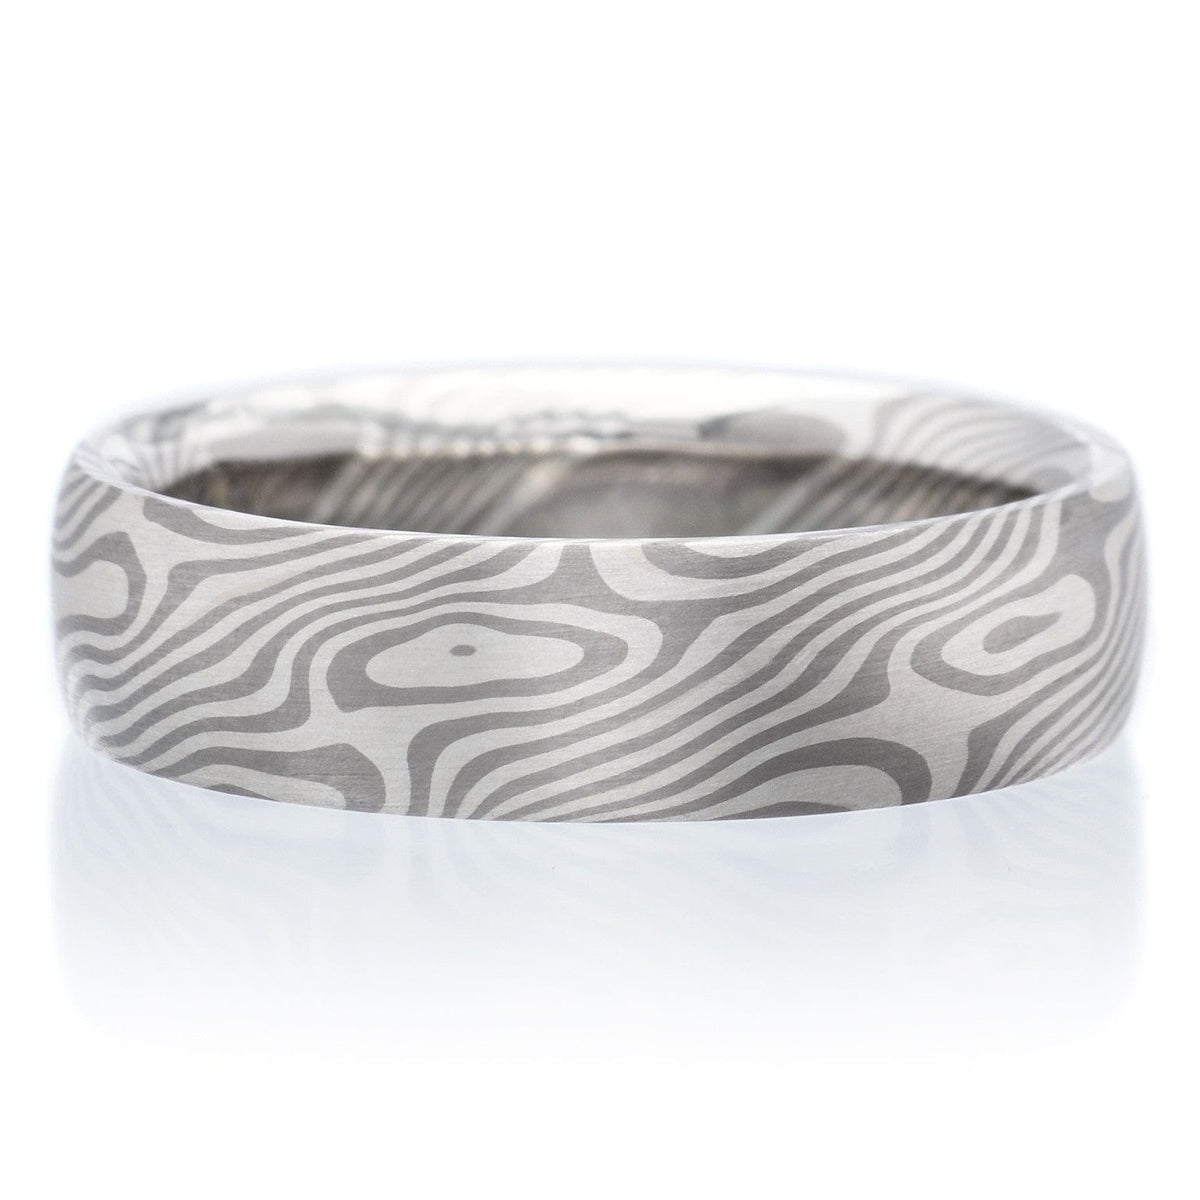 Palladium & Silver Layer 6mm Band with Slightly Rounded Profile